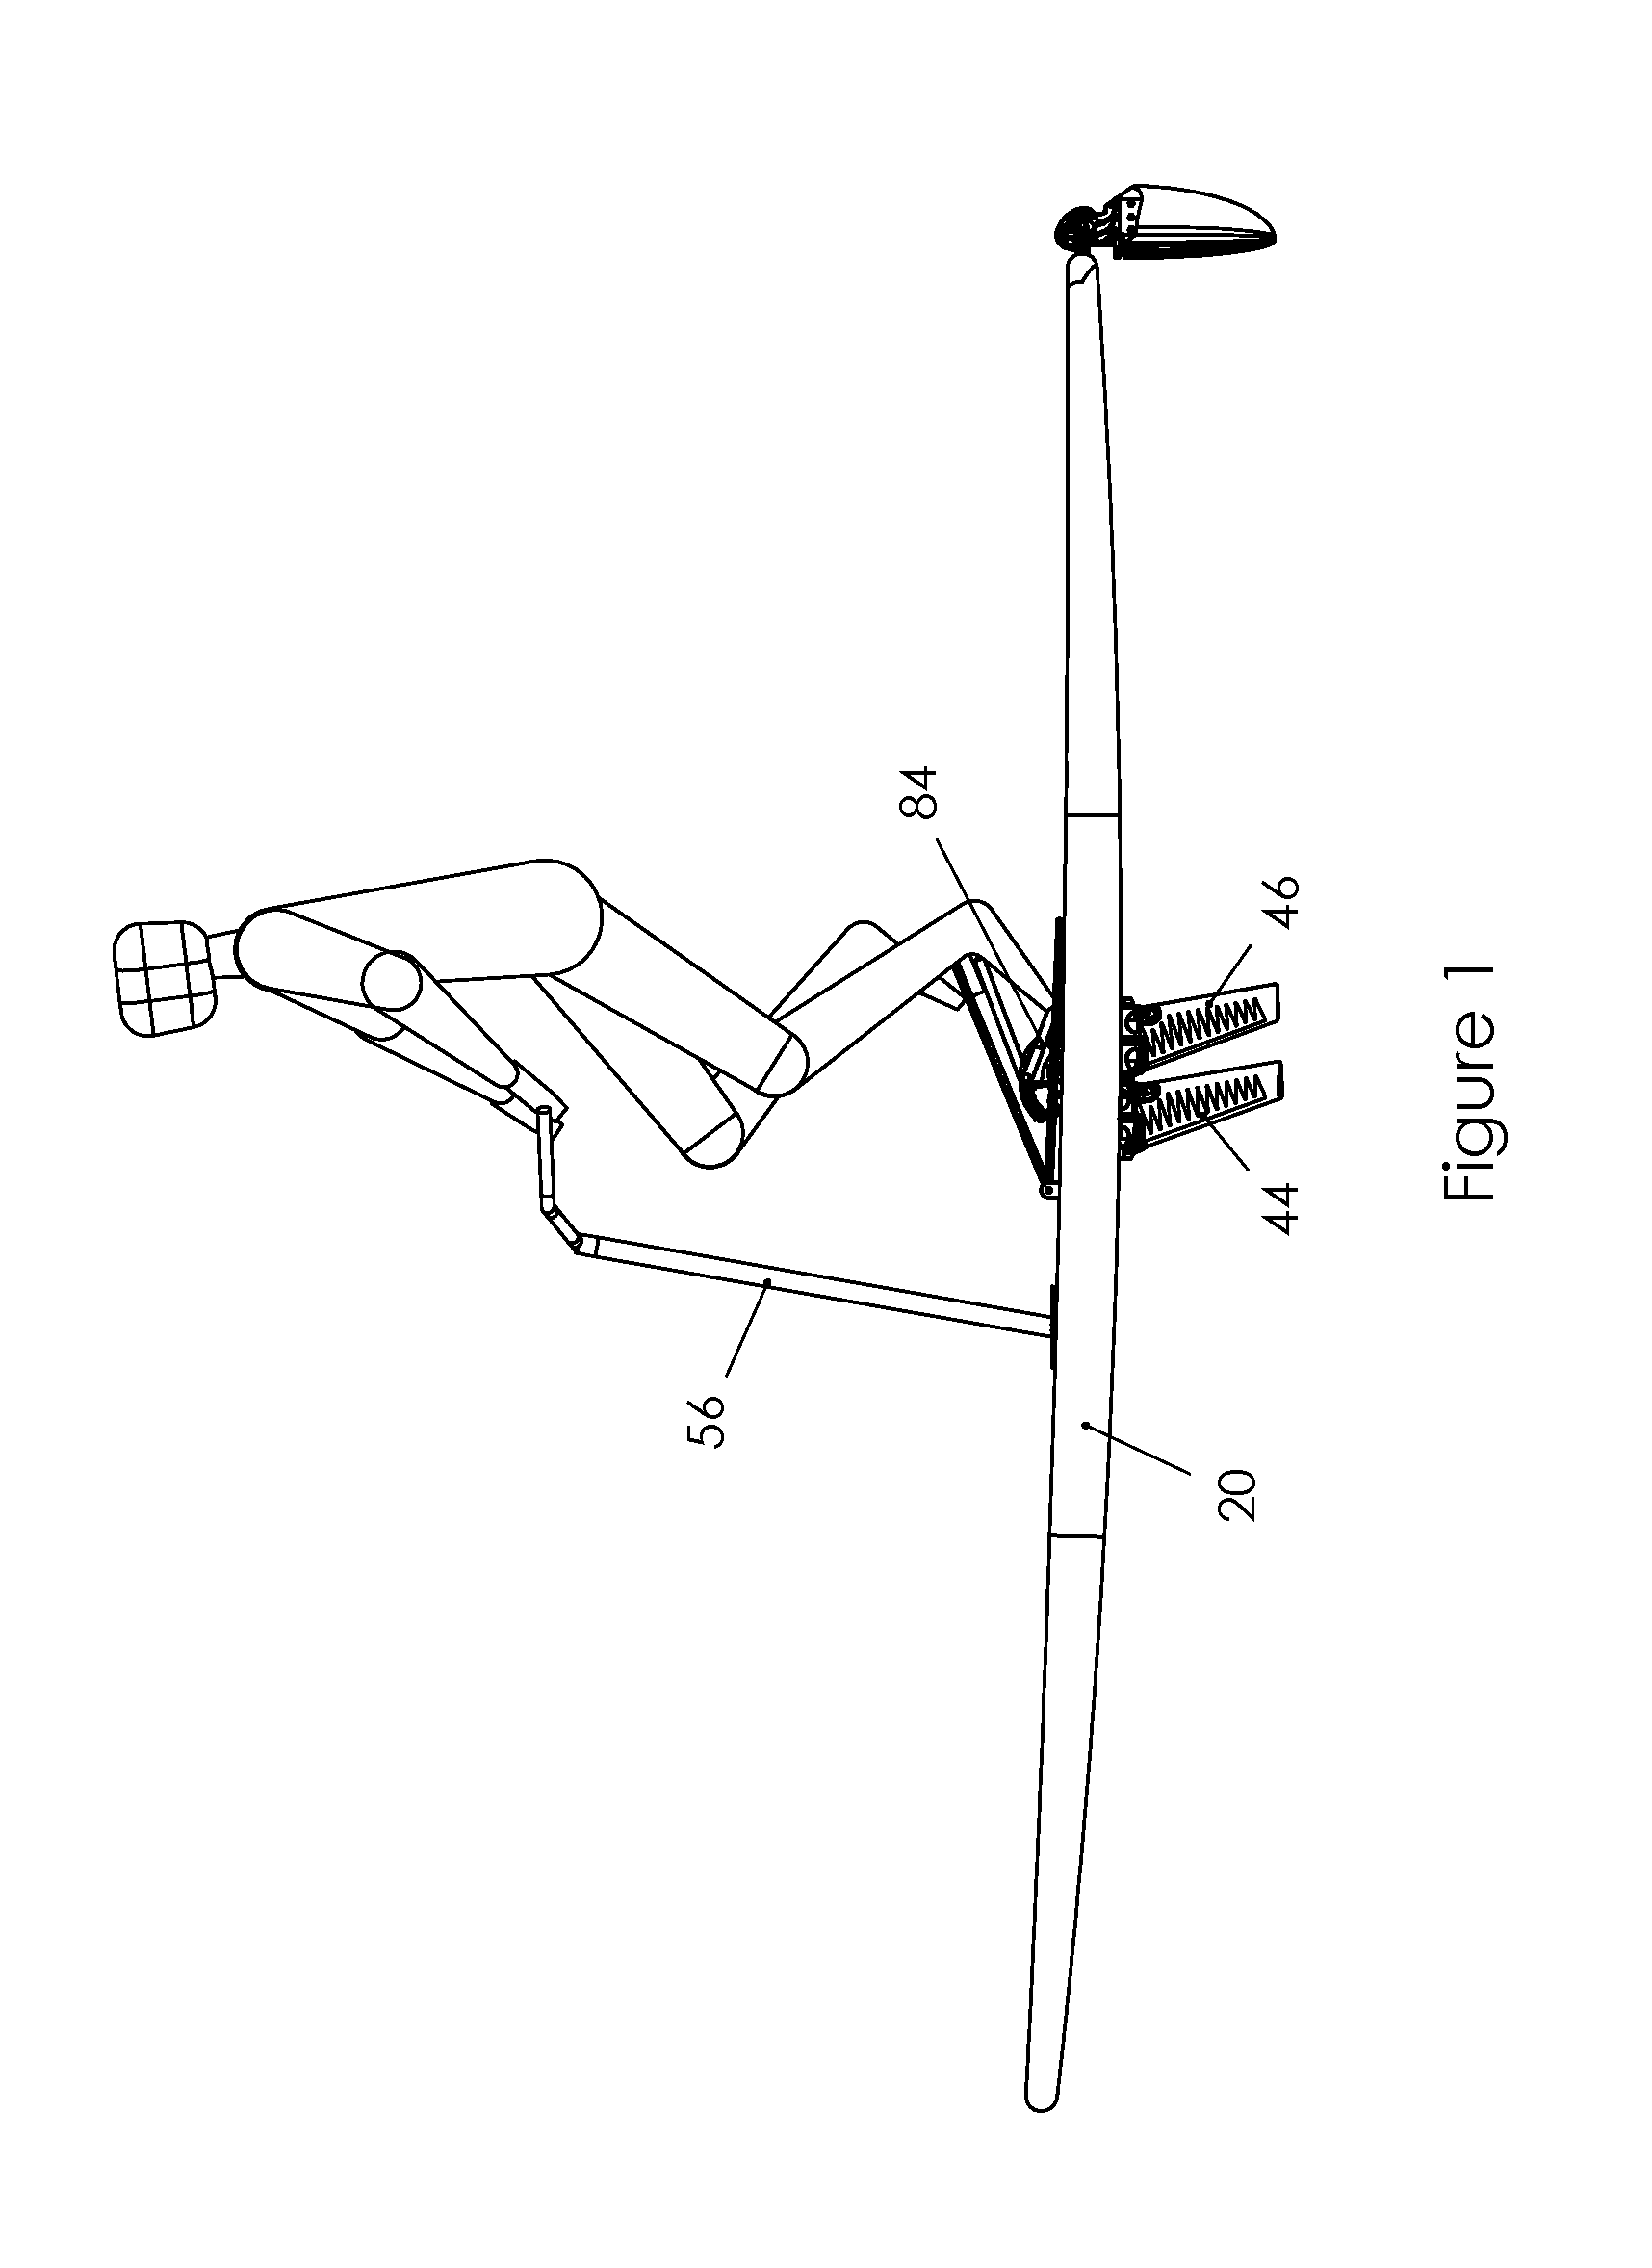 Foot operated propulsion system for watercraft